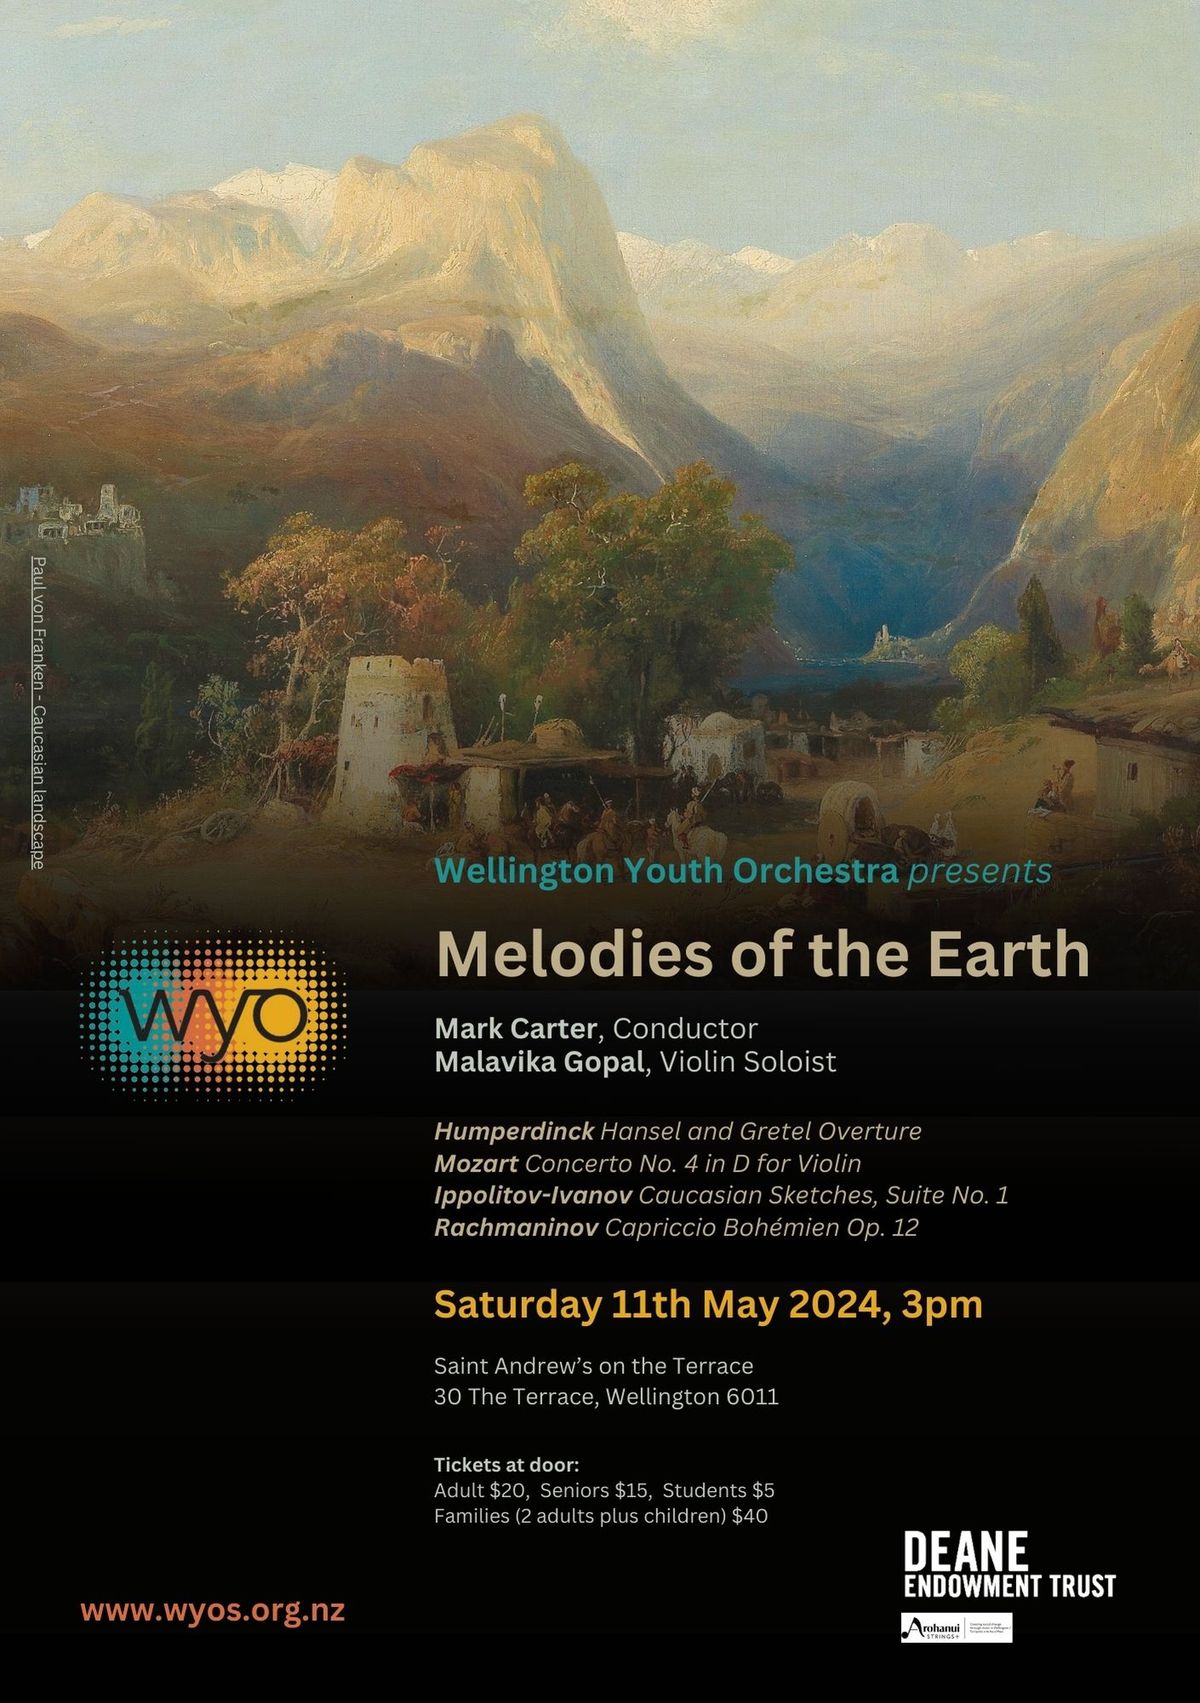 WYO Melodies of the Earth